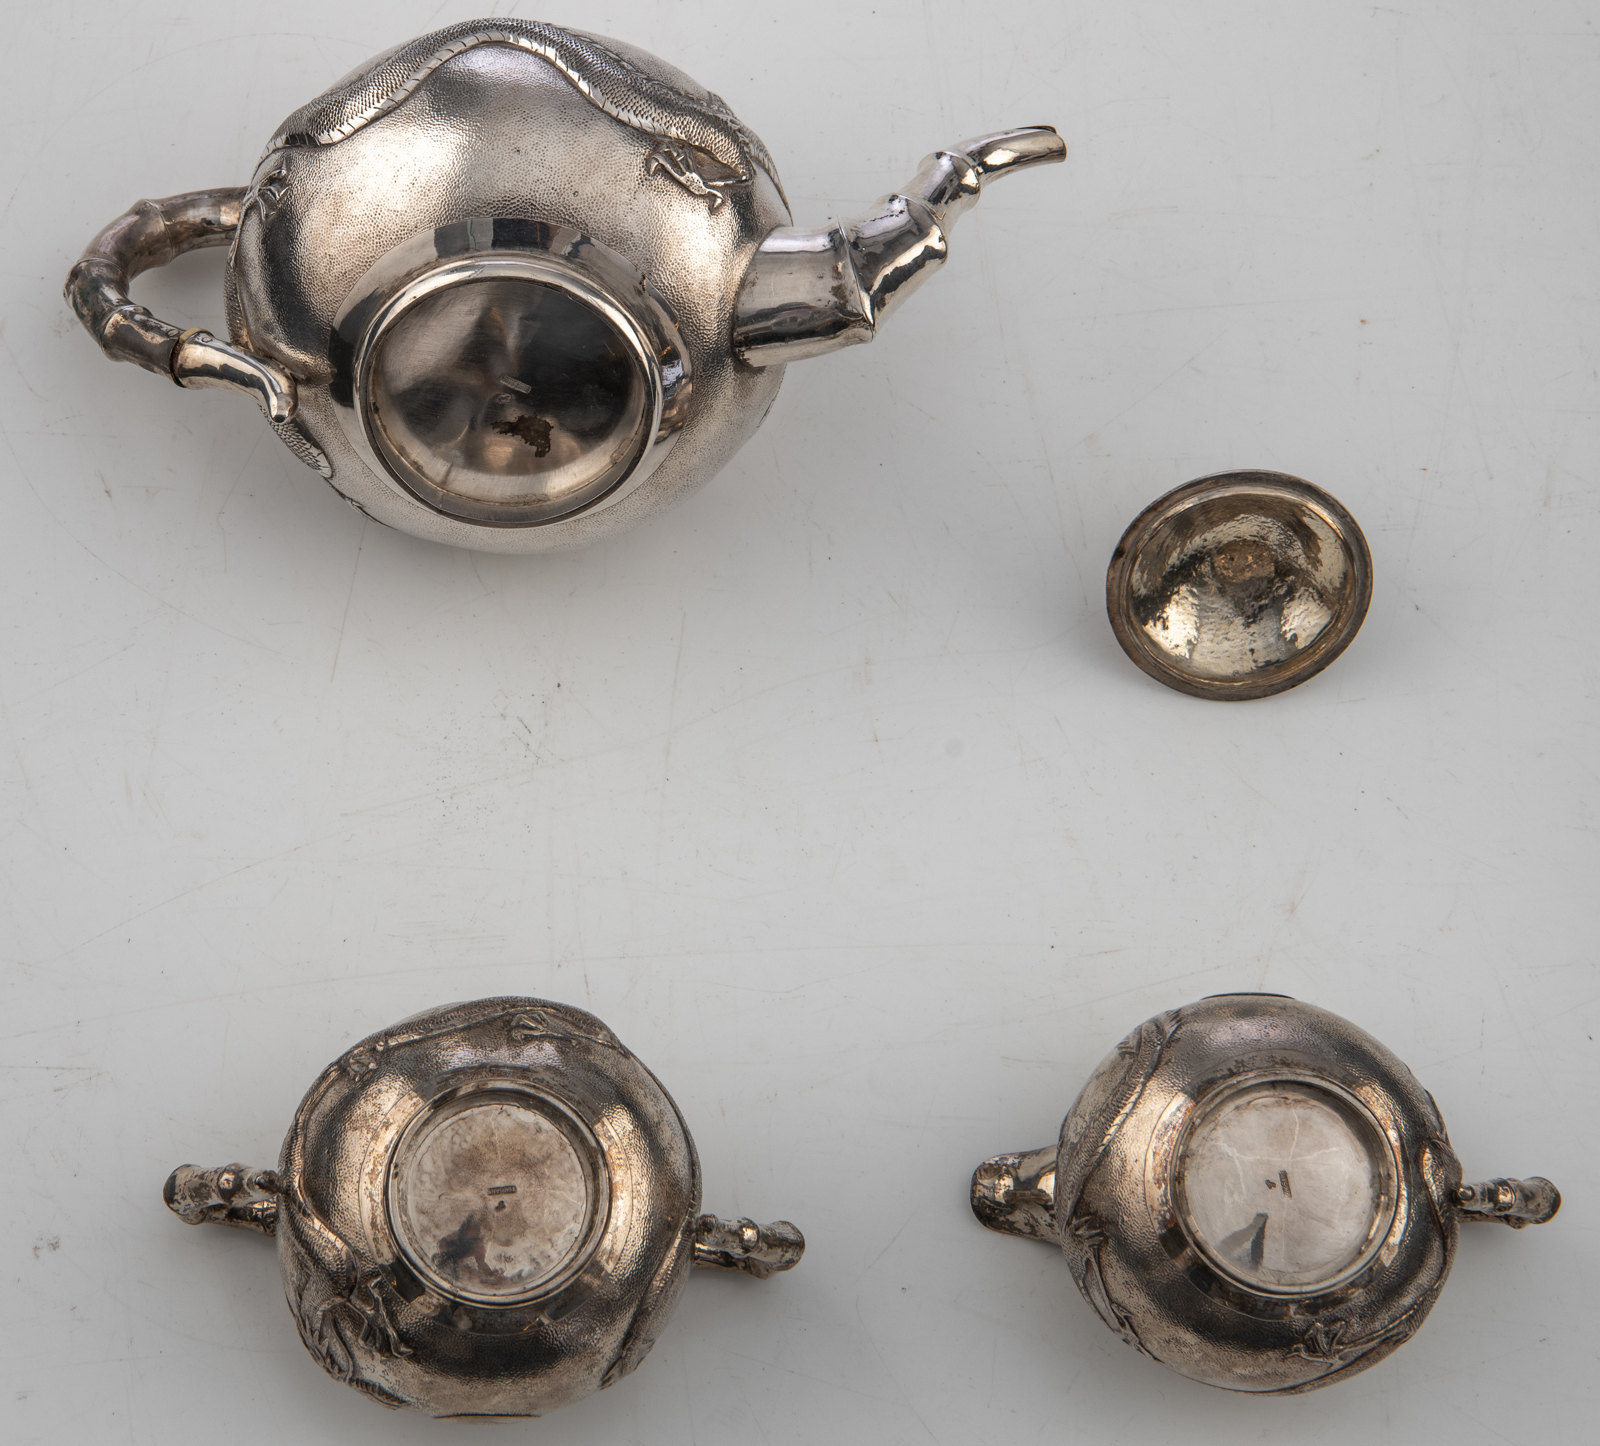 A Chinese three-piece silver tea set with dragon design, marked 'Yok Sang', Shanghai, H 4,5 - W 25,5 - Image 16 of 19